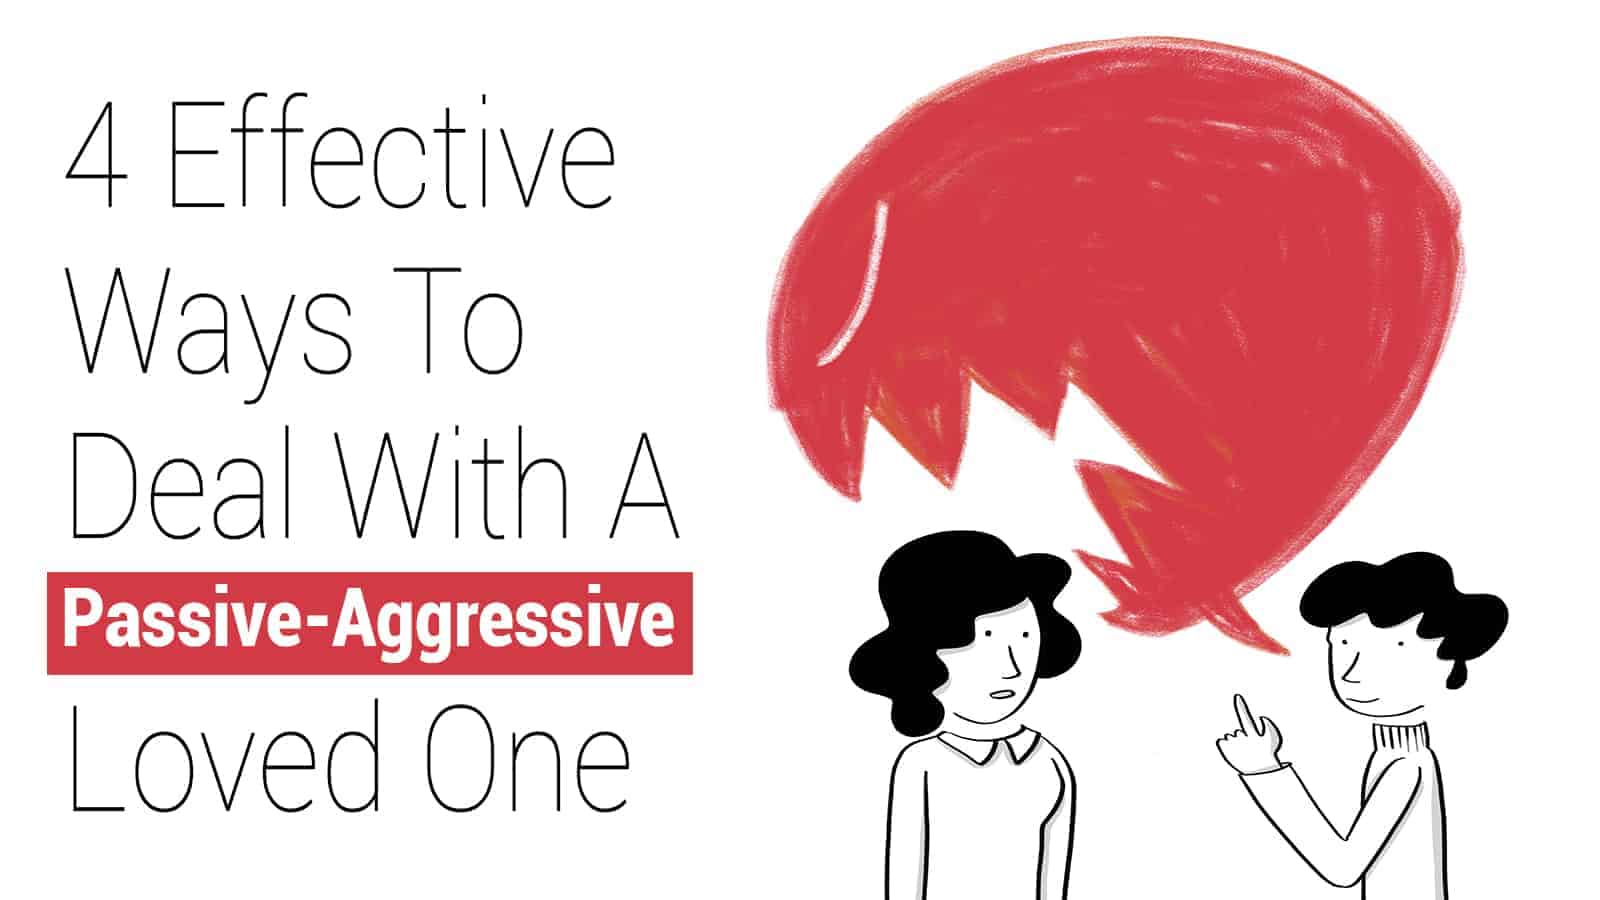 4 Effective Ways To Deal With A Passive-Aggressive Loved One